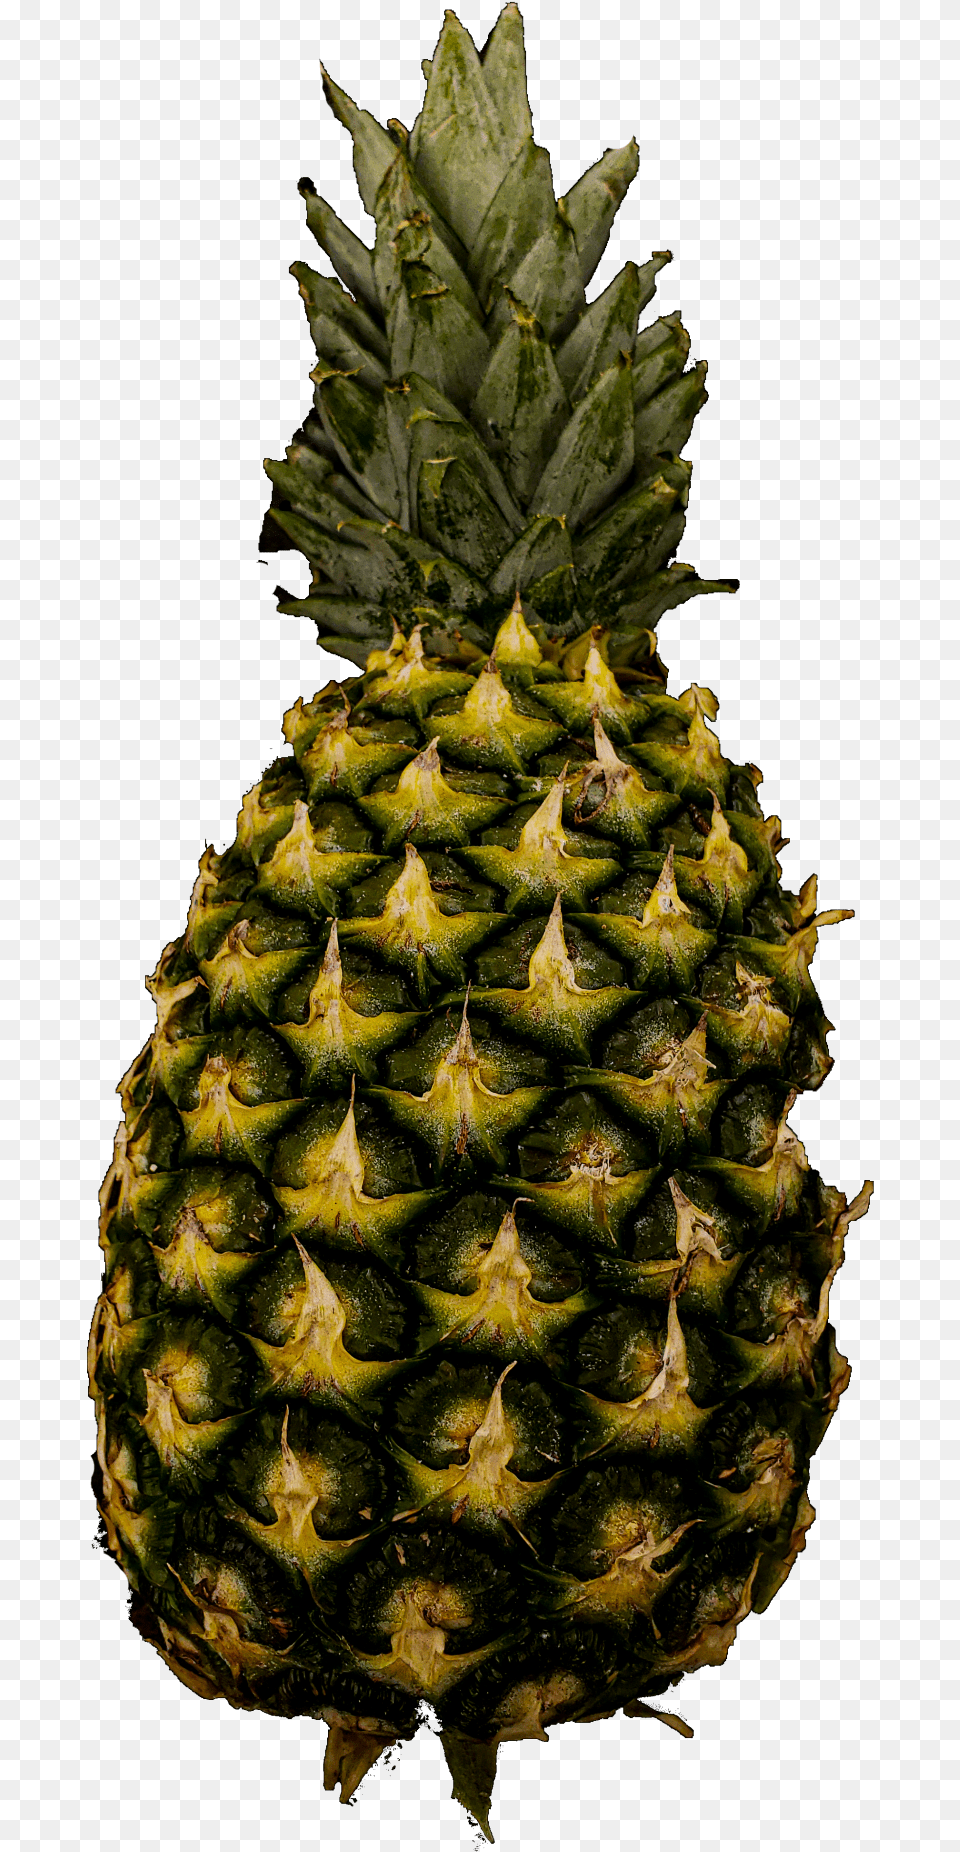 Pineapple Public Domain Pictures Ananas, Food, Fruit, Plant, Produce Png Image